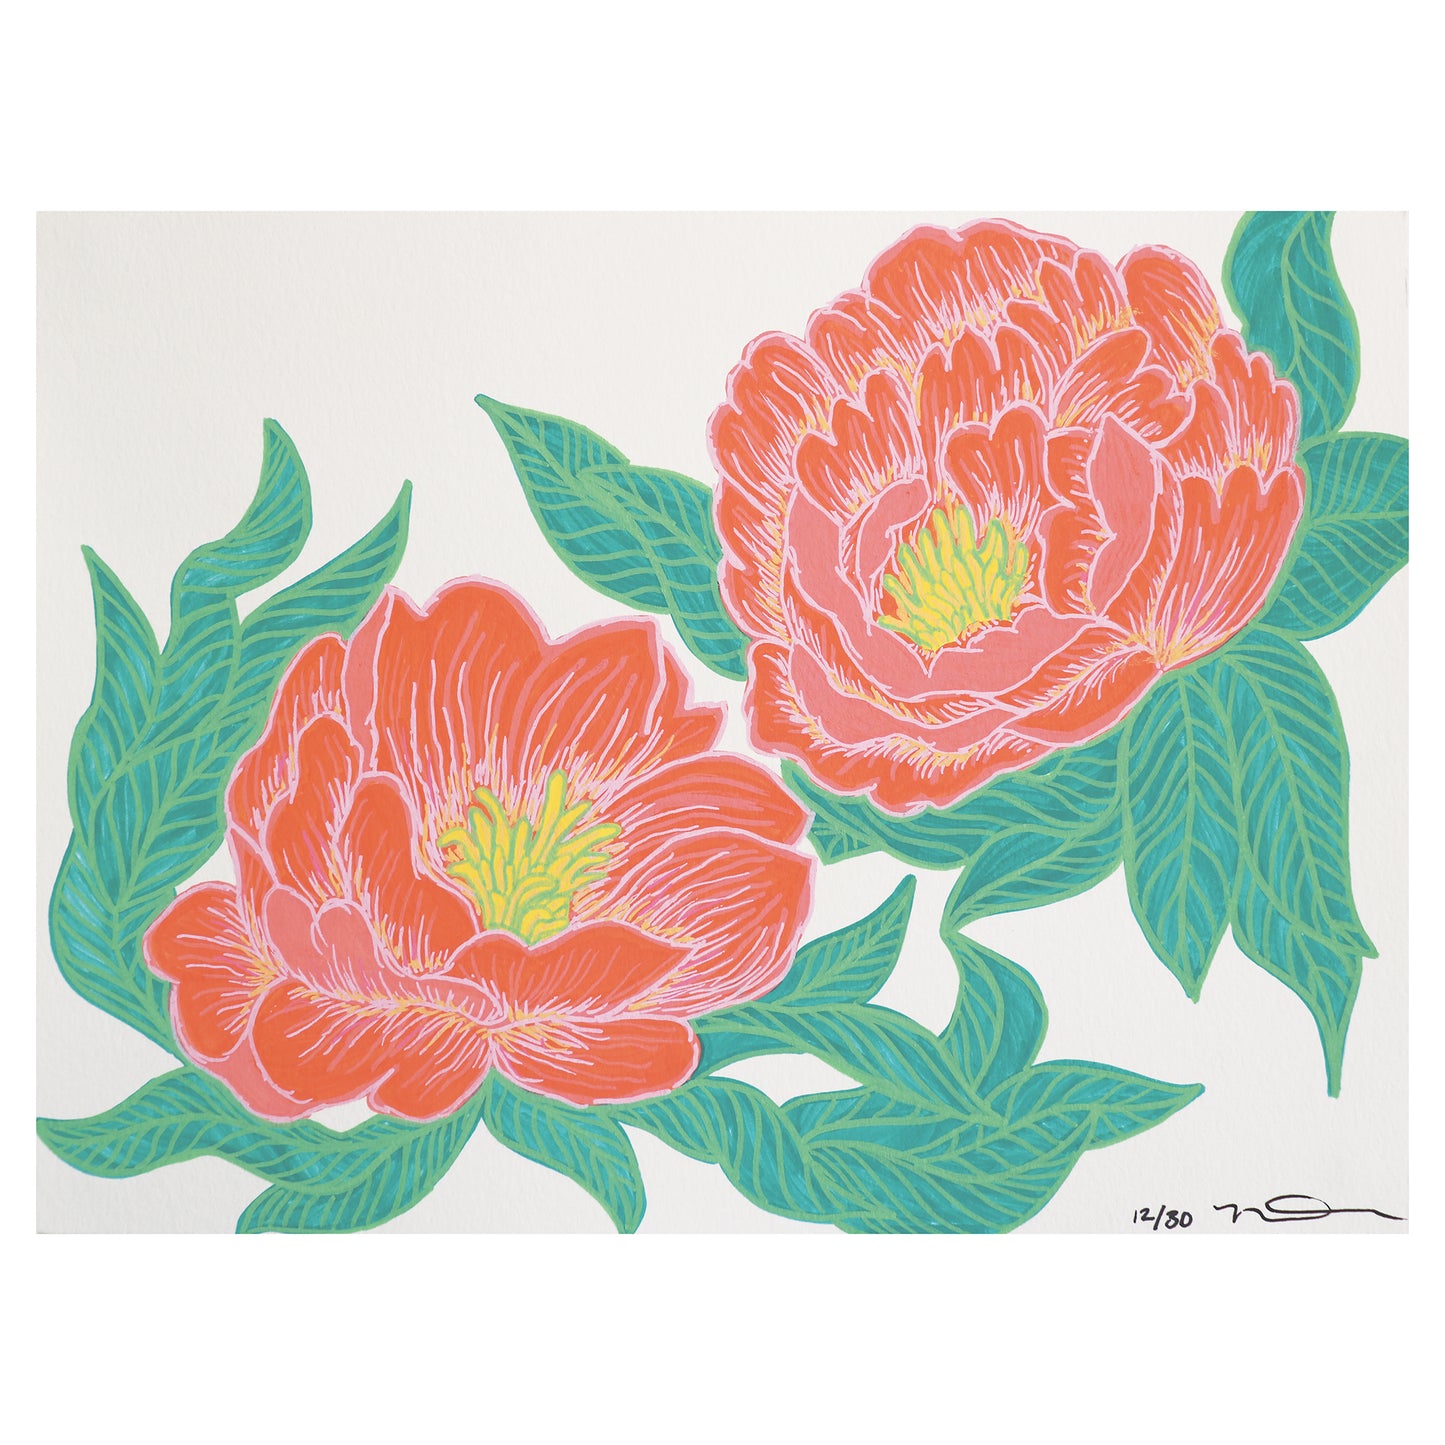 Little Delight #12: Coral Peonies